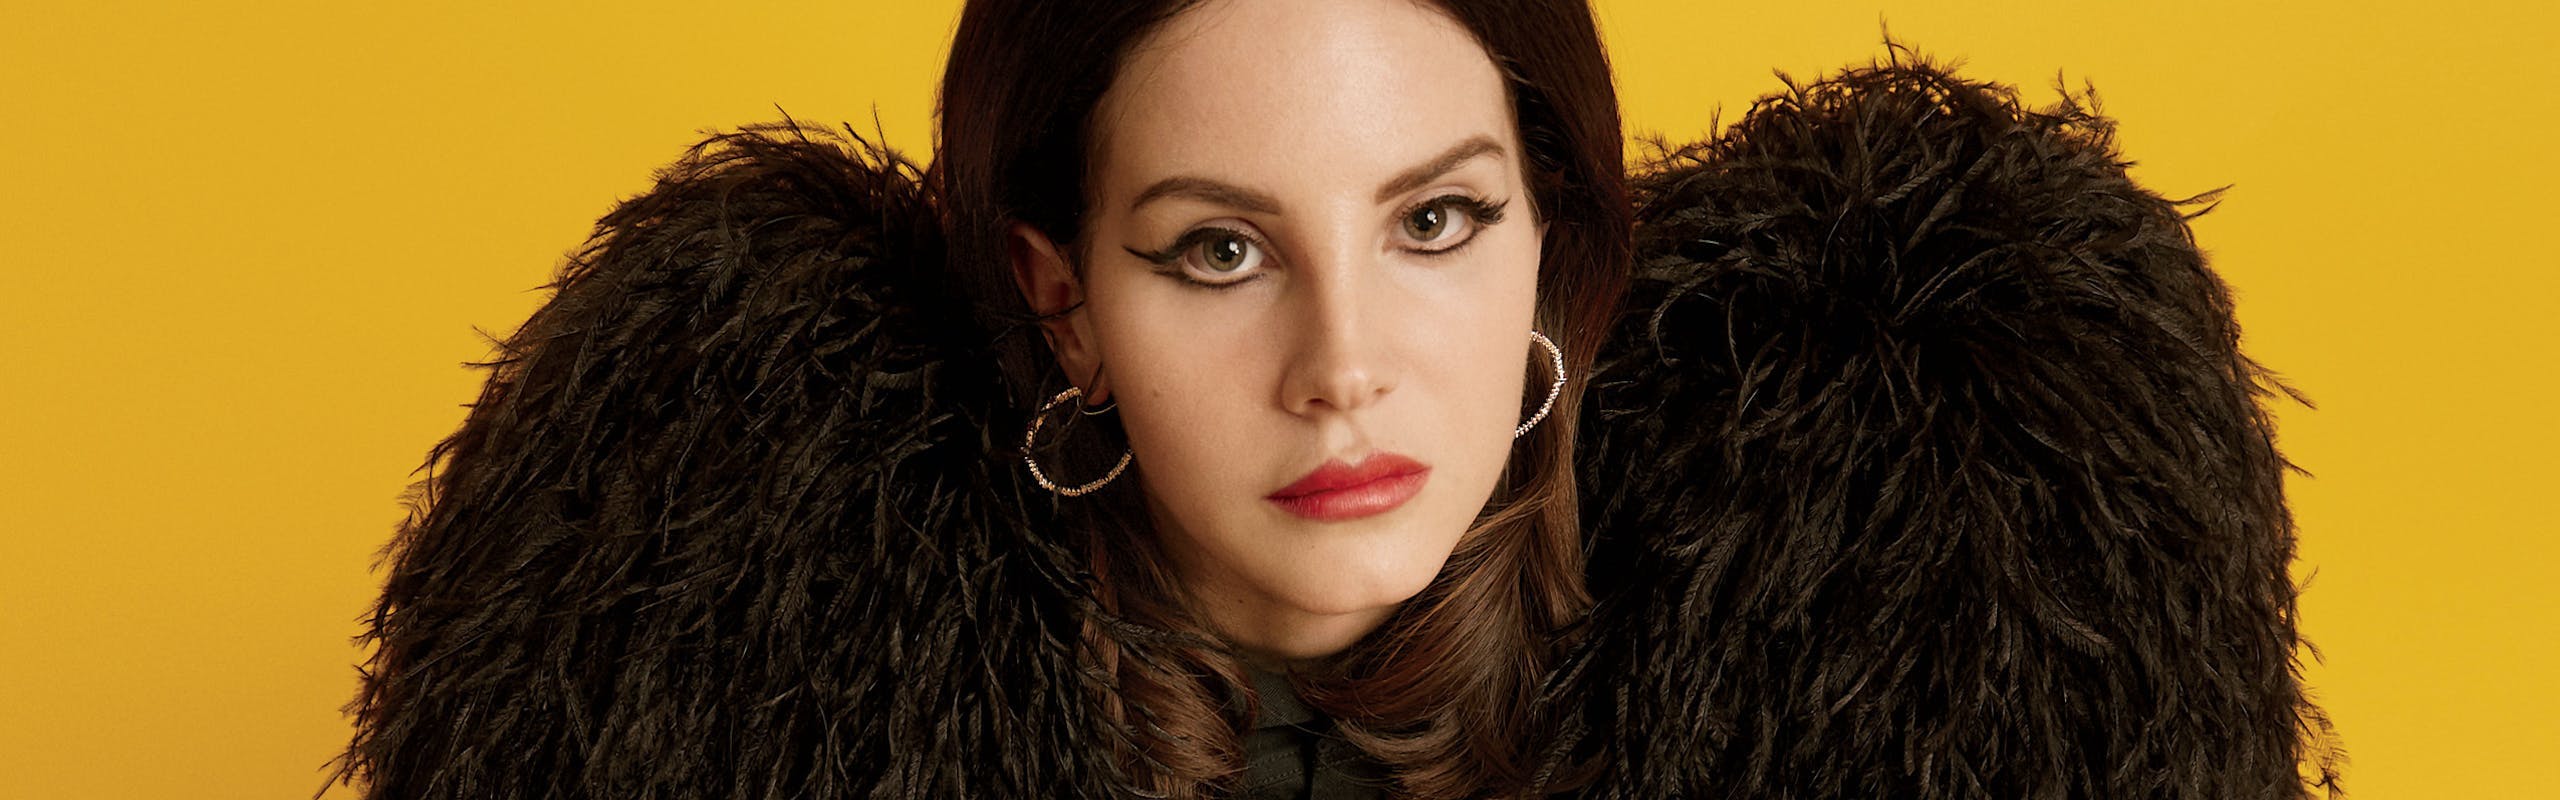 Lana Del Rey photographed by Mick Rock for L'OFFICIEL USA March 2018.